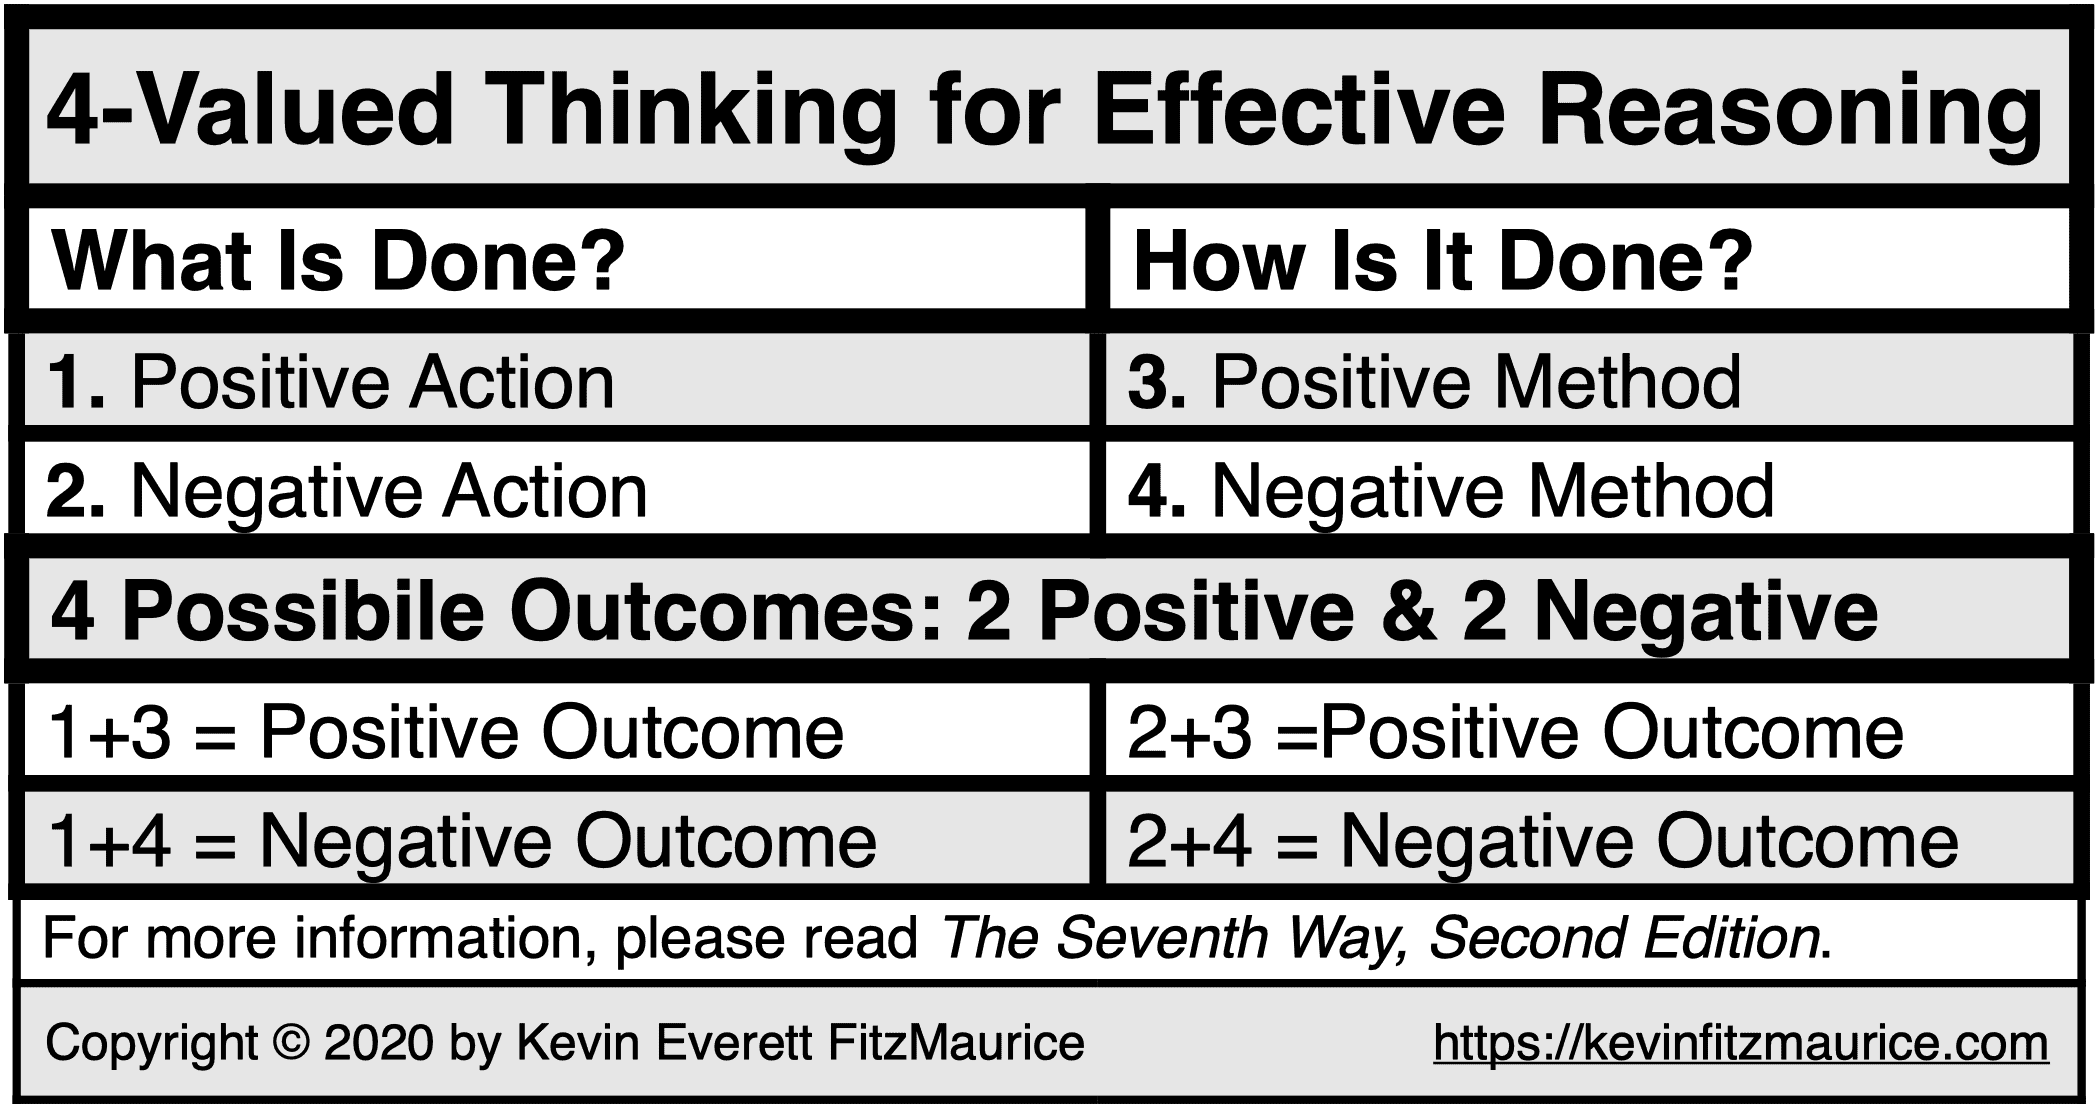 4-Valued Thinking for Effective Reasoning